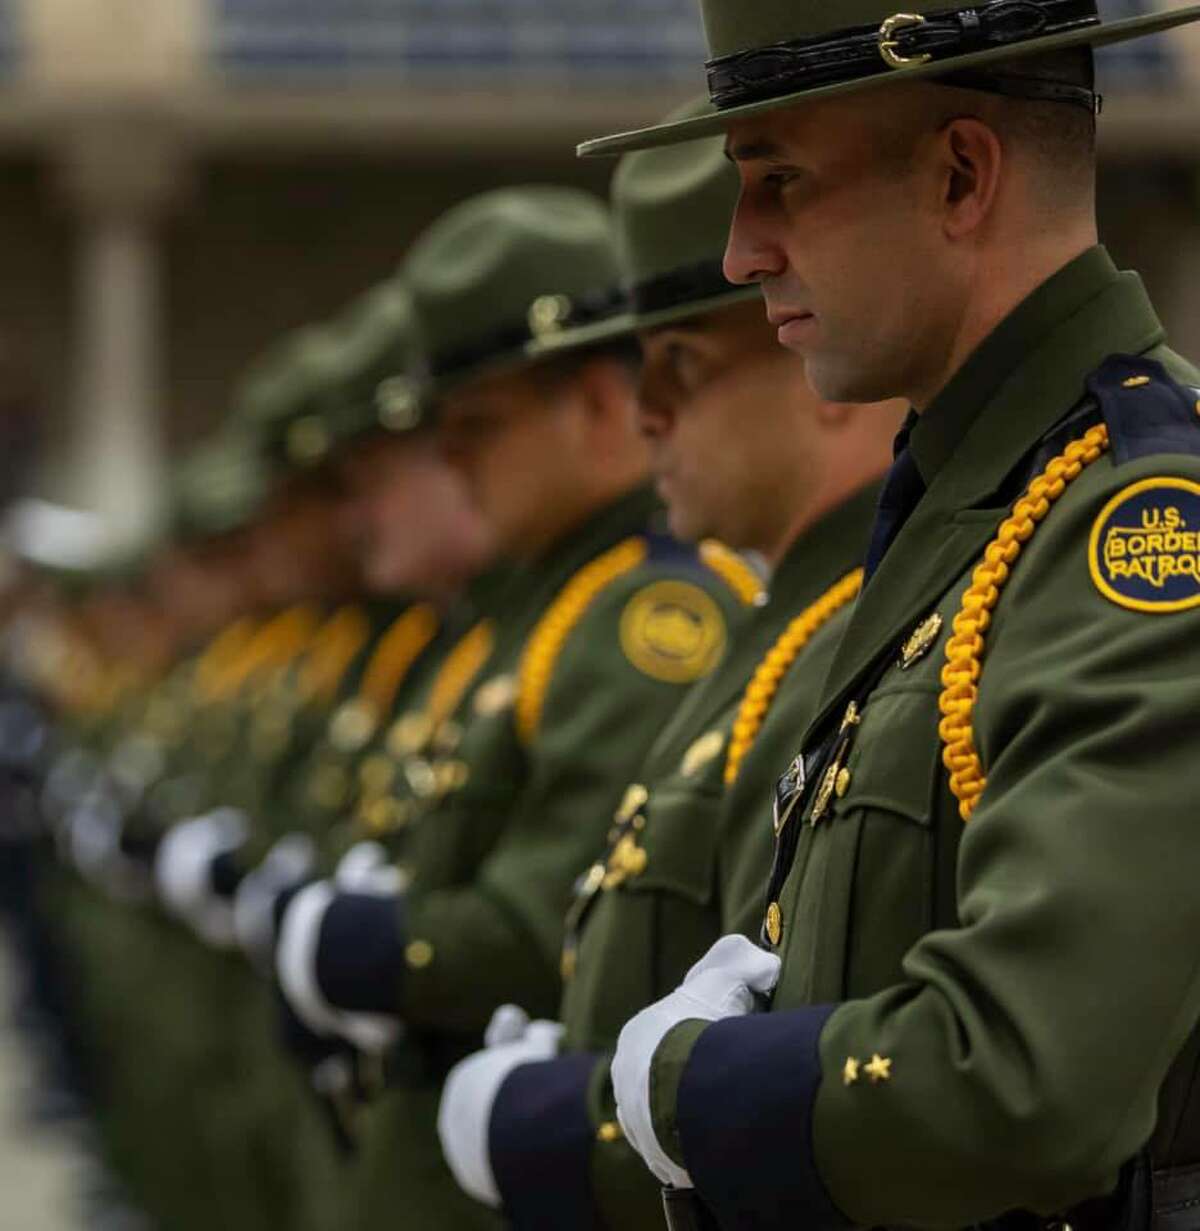 The Laredo Sector Border Patrol apprehended 46 individuals who were in the country illegally this weekend, according to U.S. Customs and Border Protection.